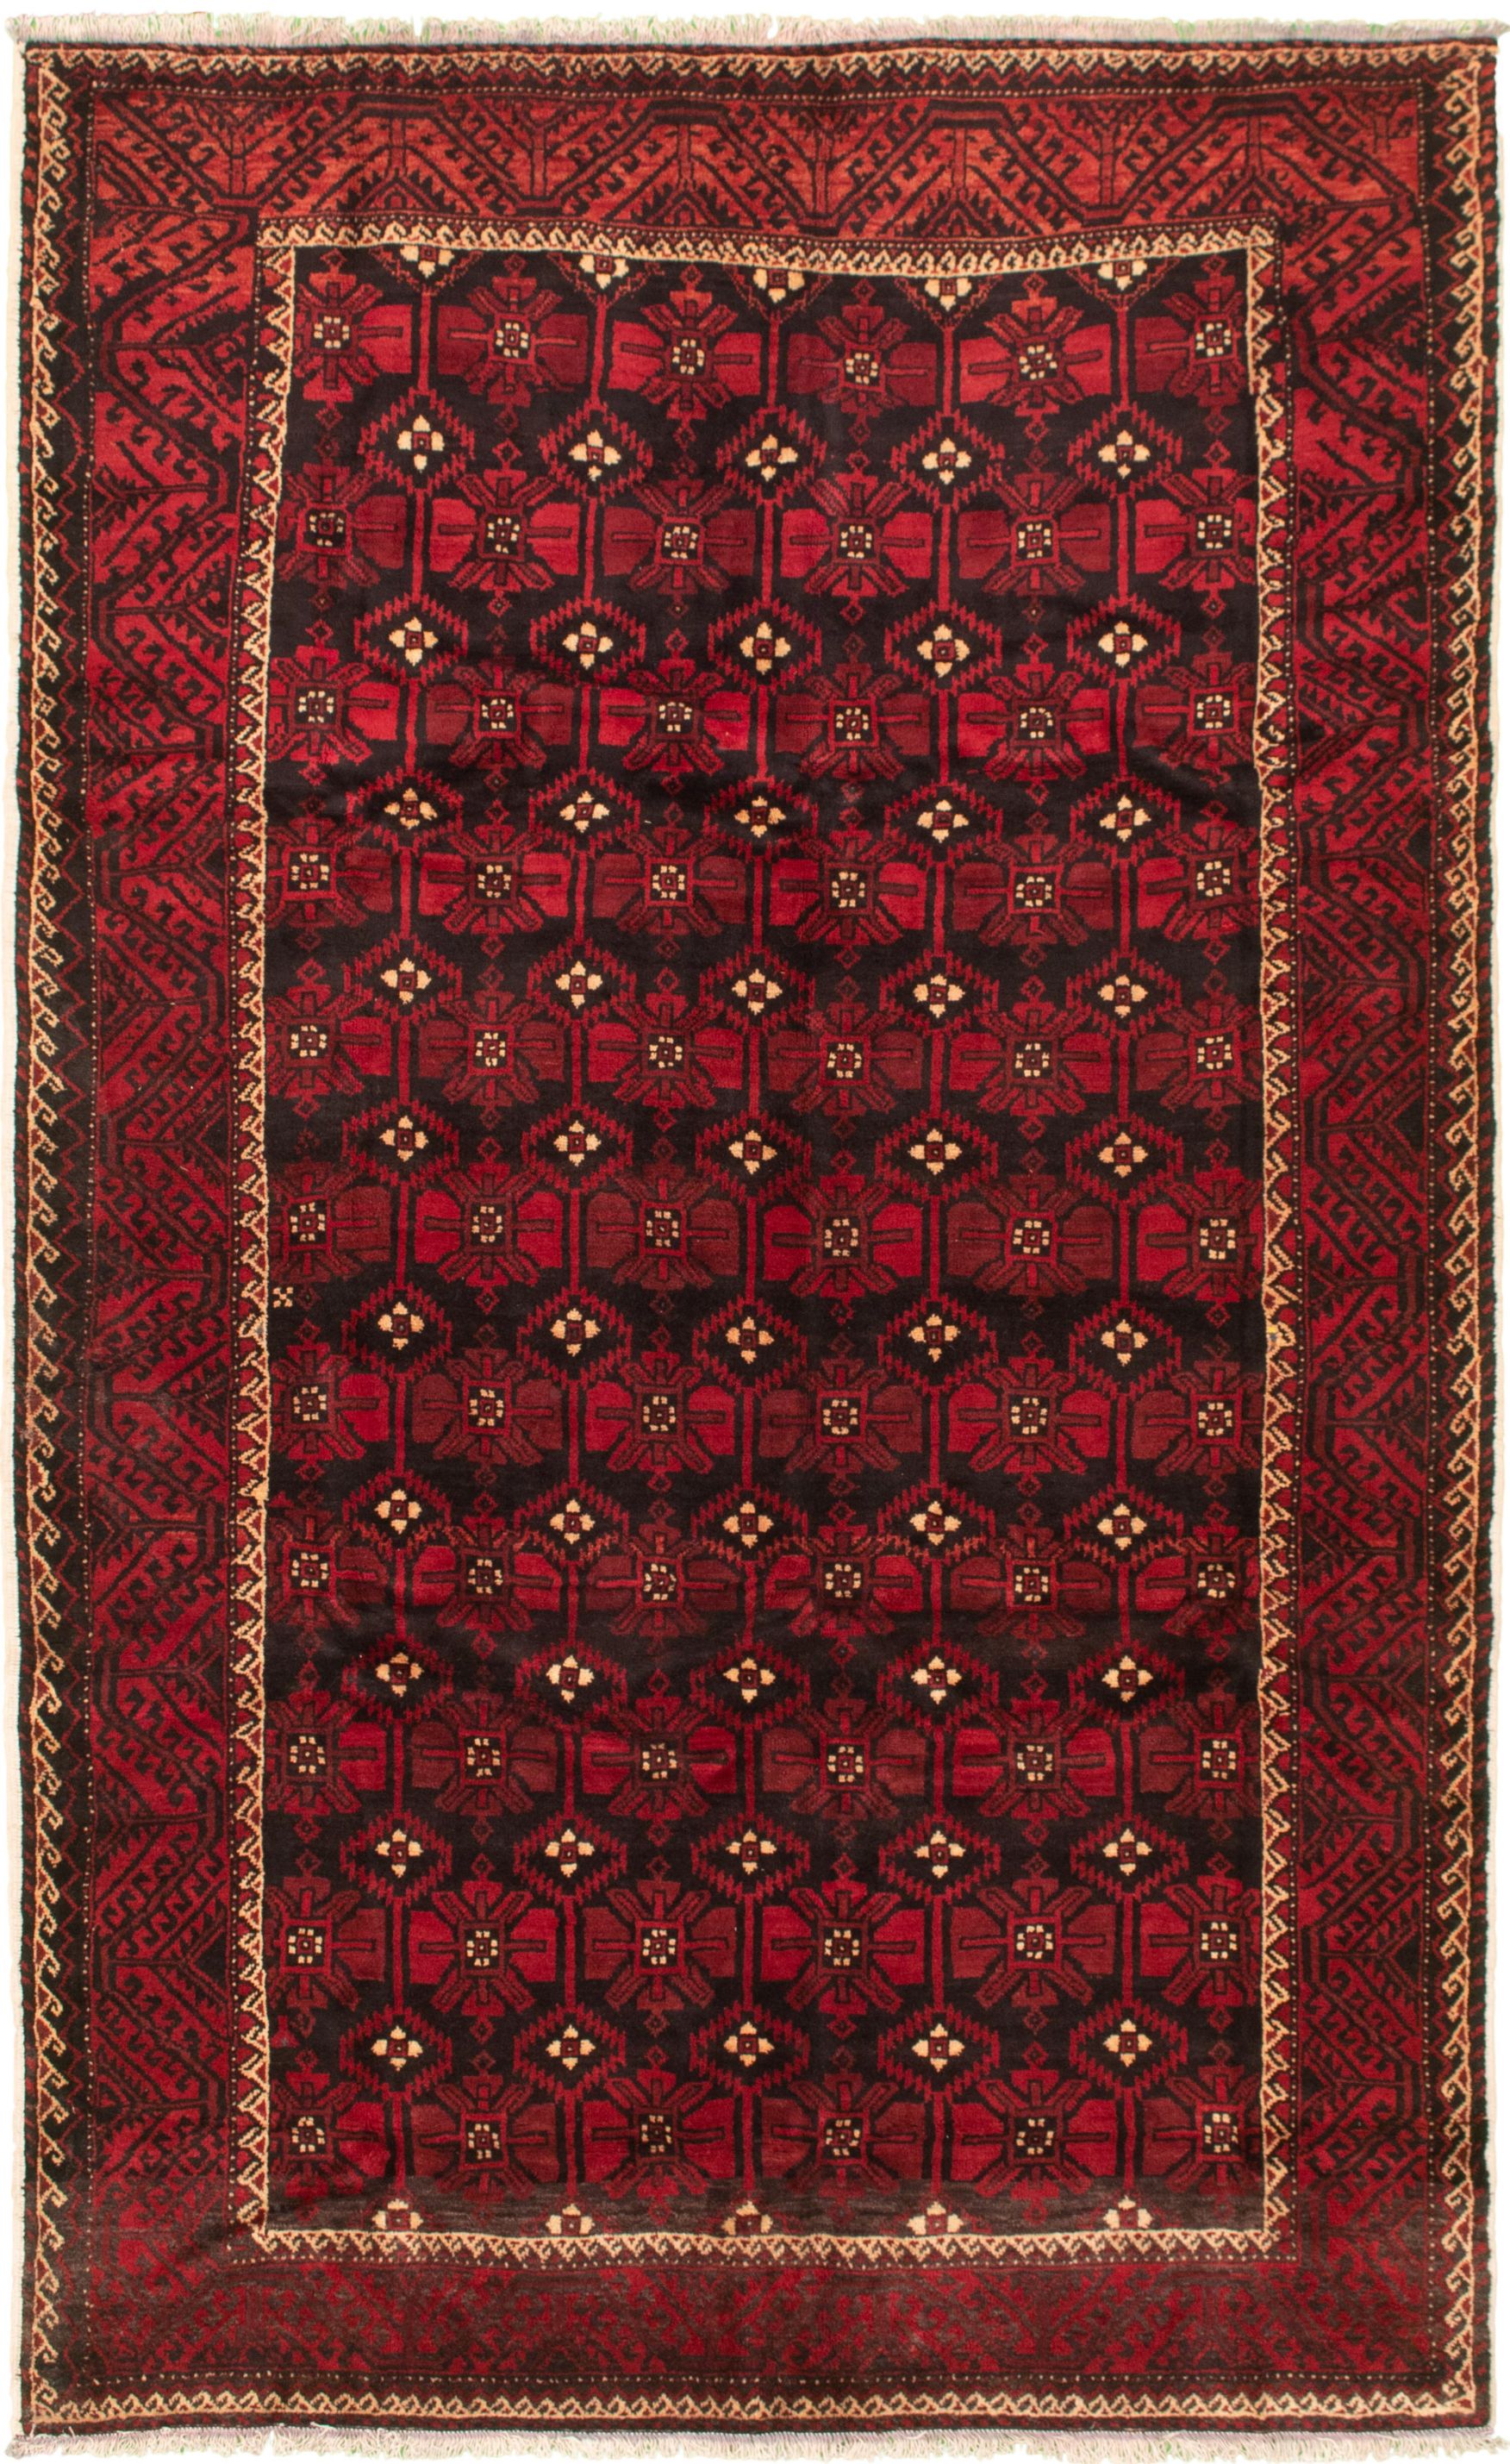 Hand-knotted Authentic Turkish Burgundy Wool Rug 5'9" x 9'7" Size: 5'9" x 9'7"  